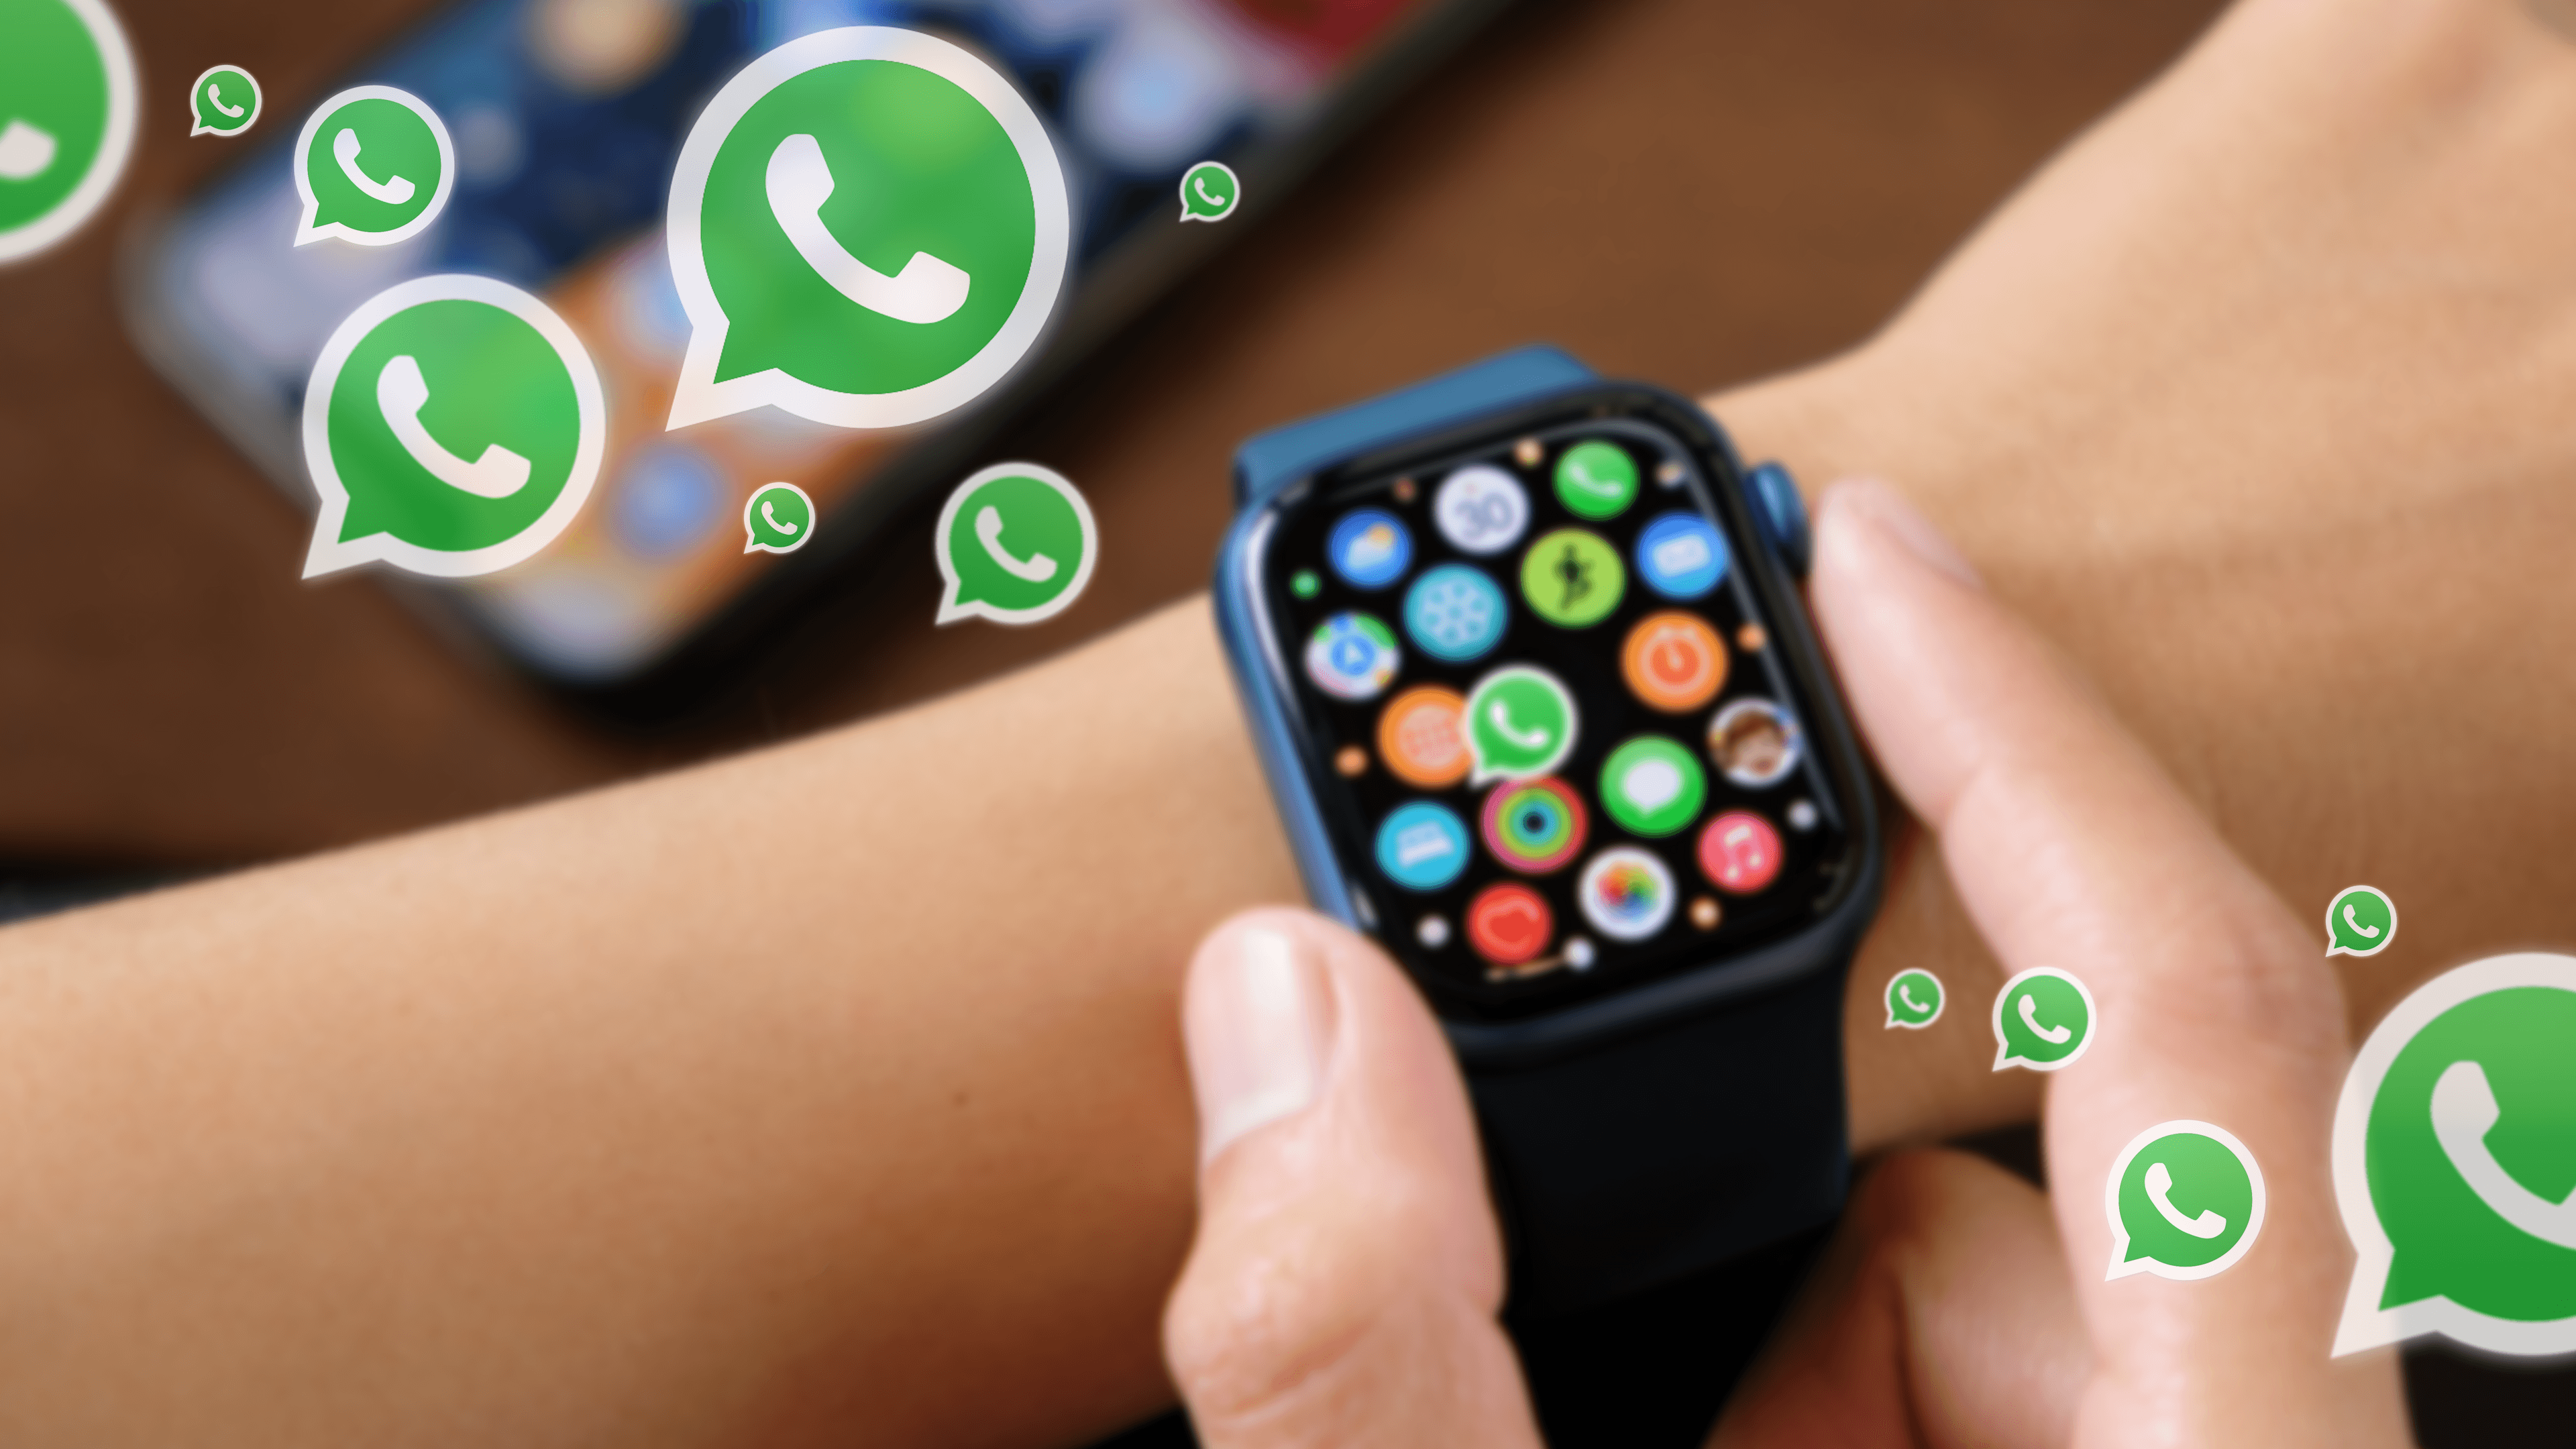 How to fix WhatsApp notifications not showing on Apple Watch